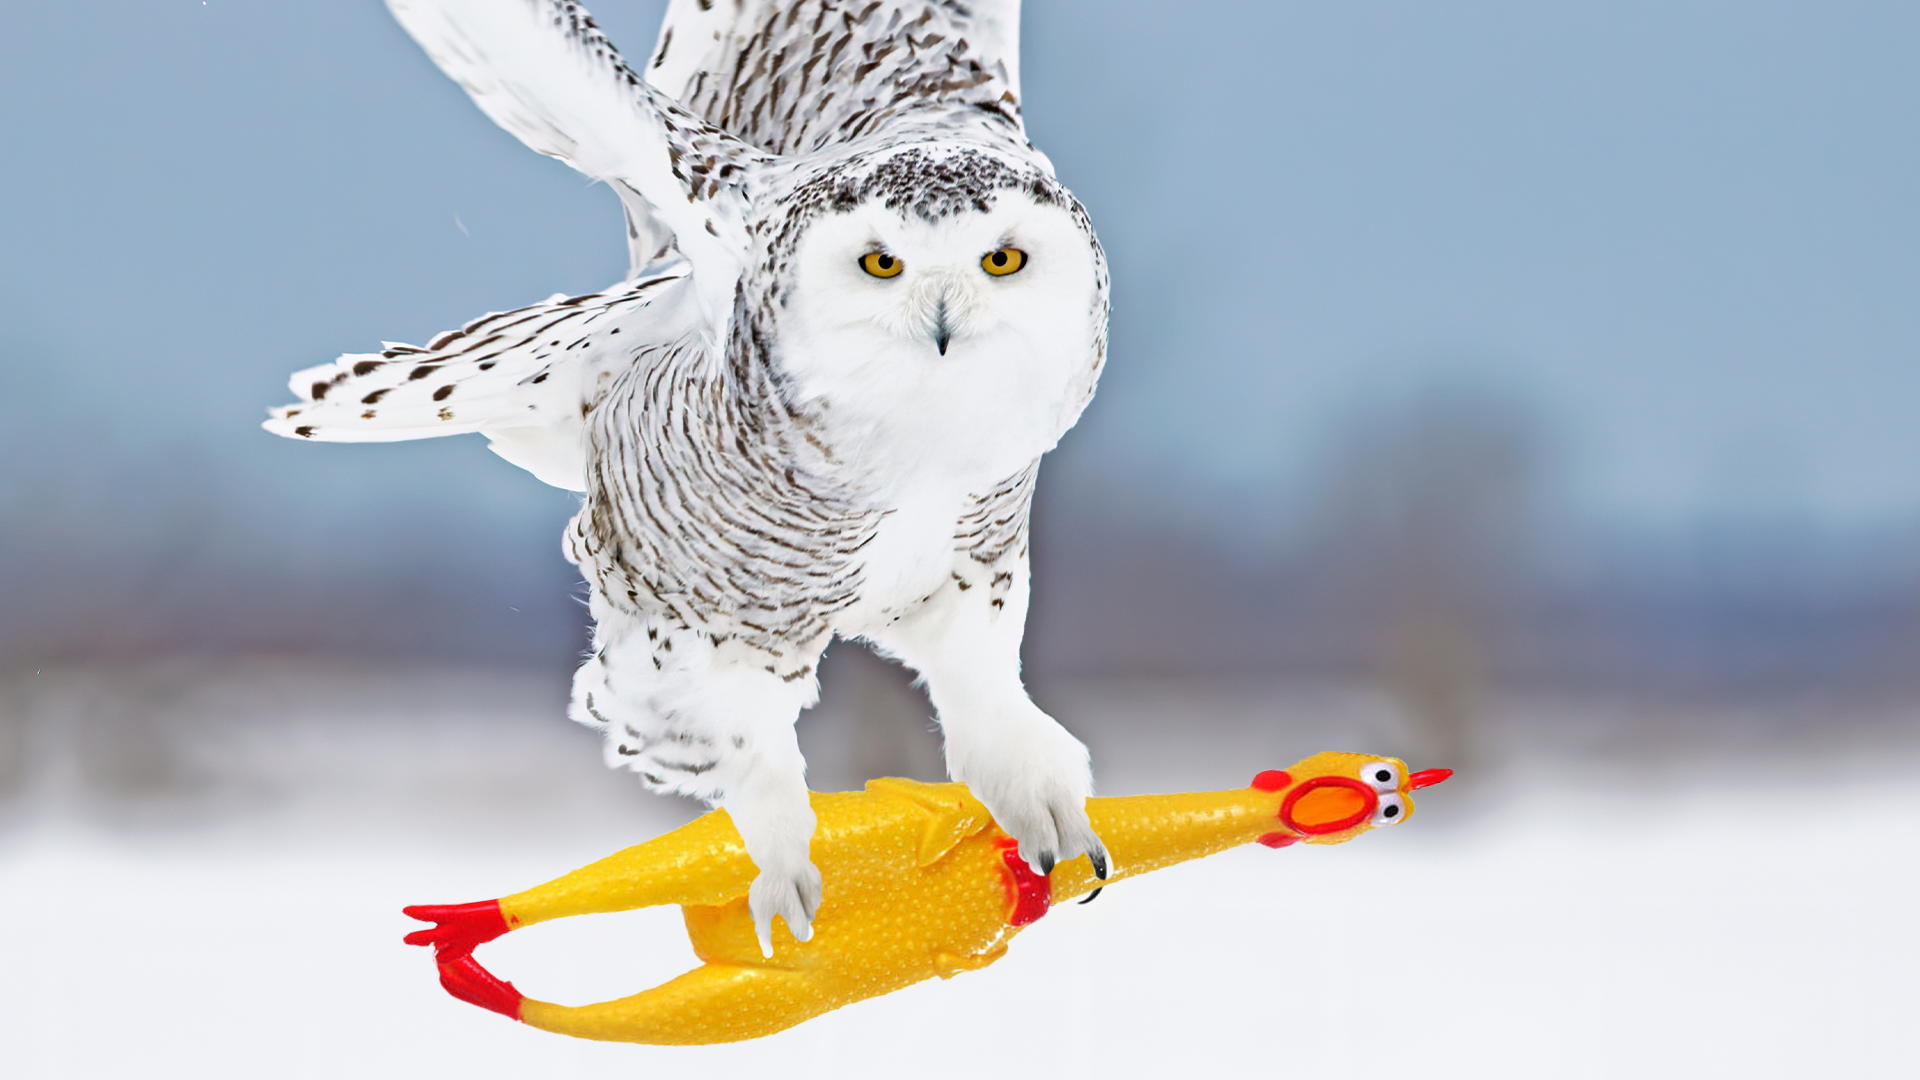 Snowy owl carrying a rubber chicken